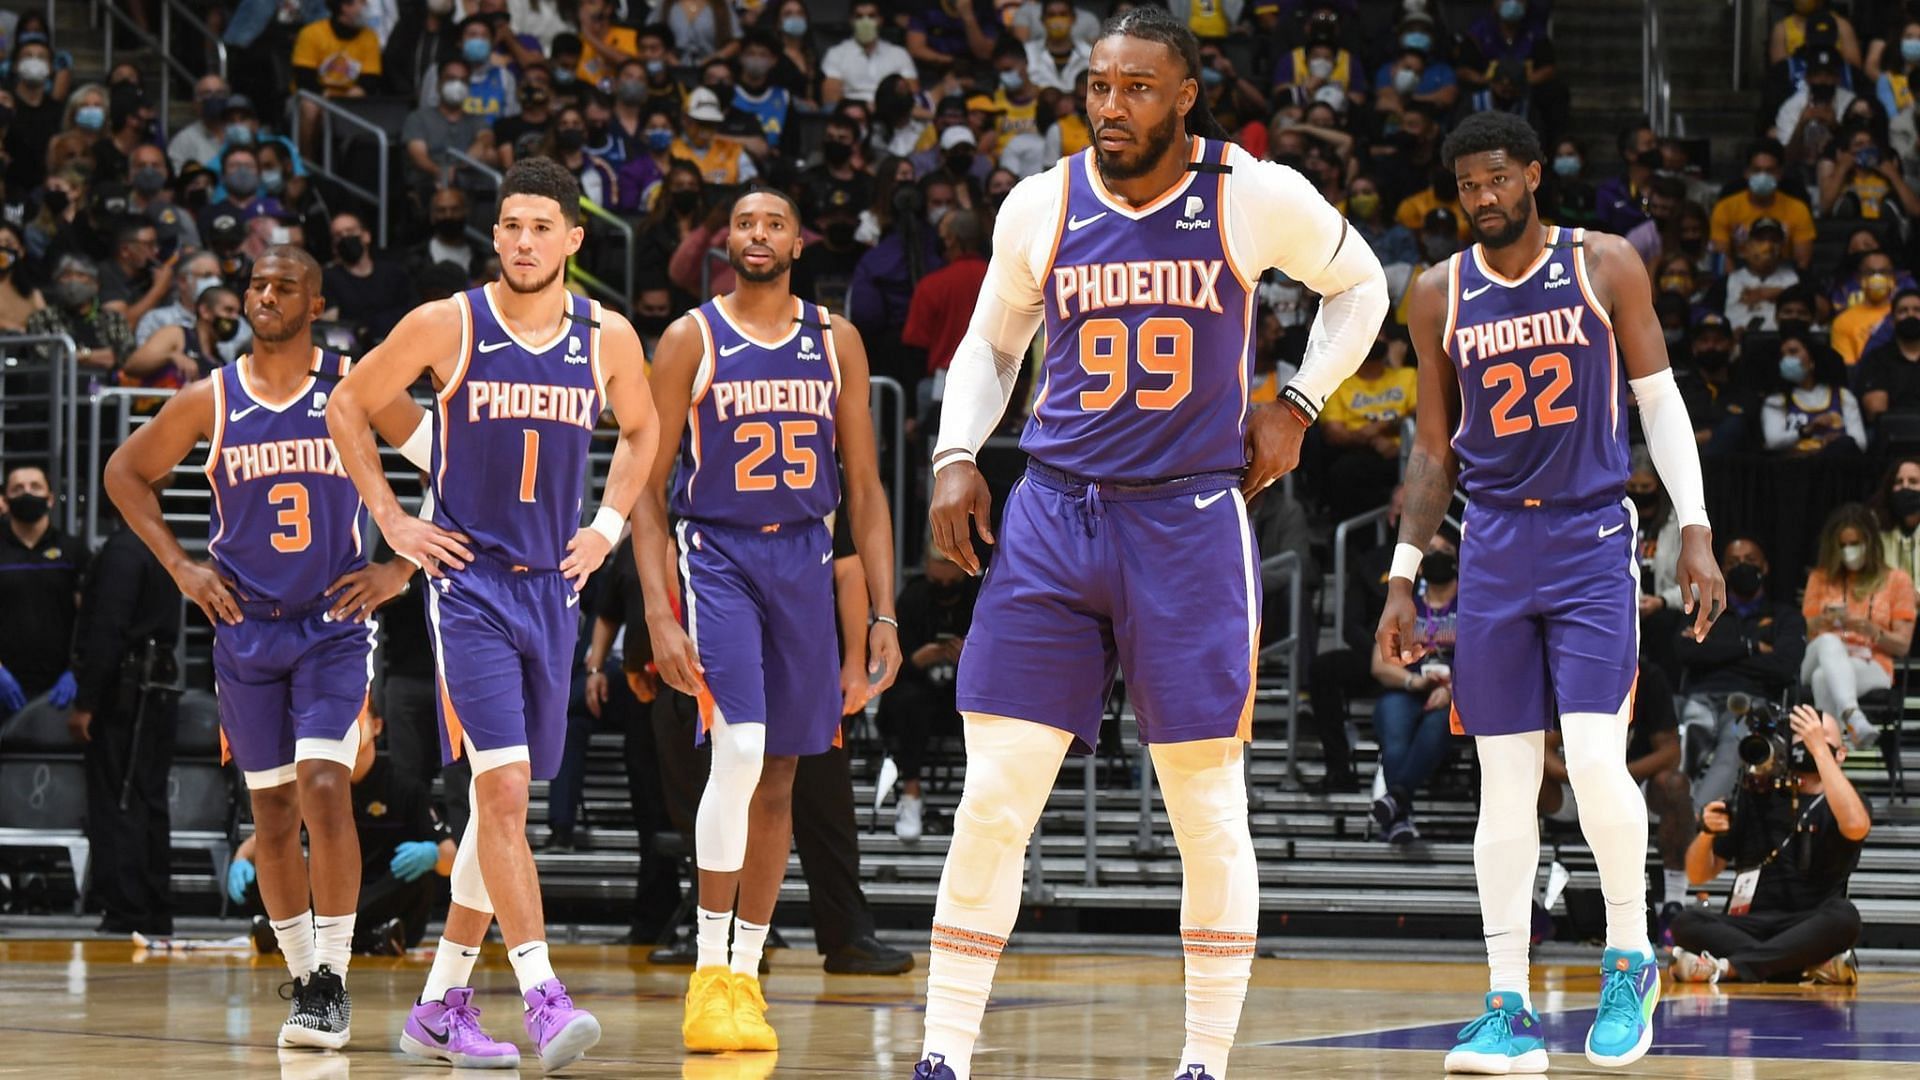 The Phoenix Suns currently own the best record in the NBA. [Photo: Sky Sports]